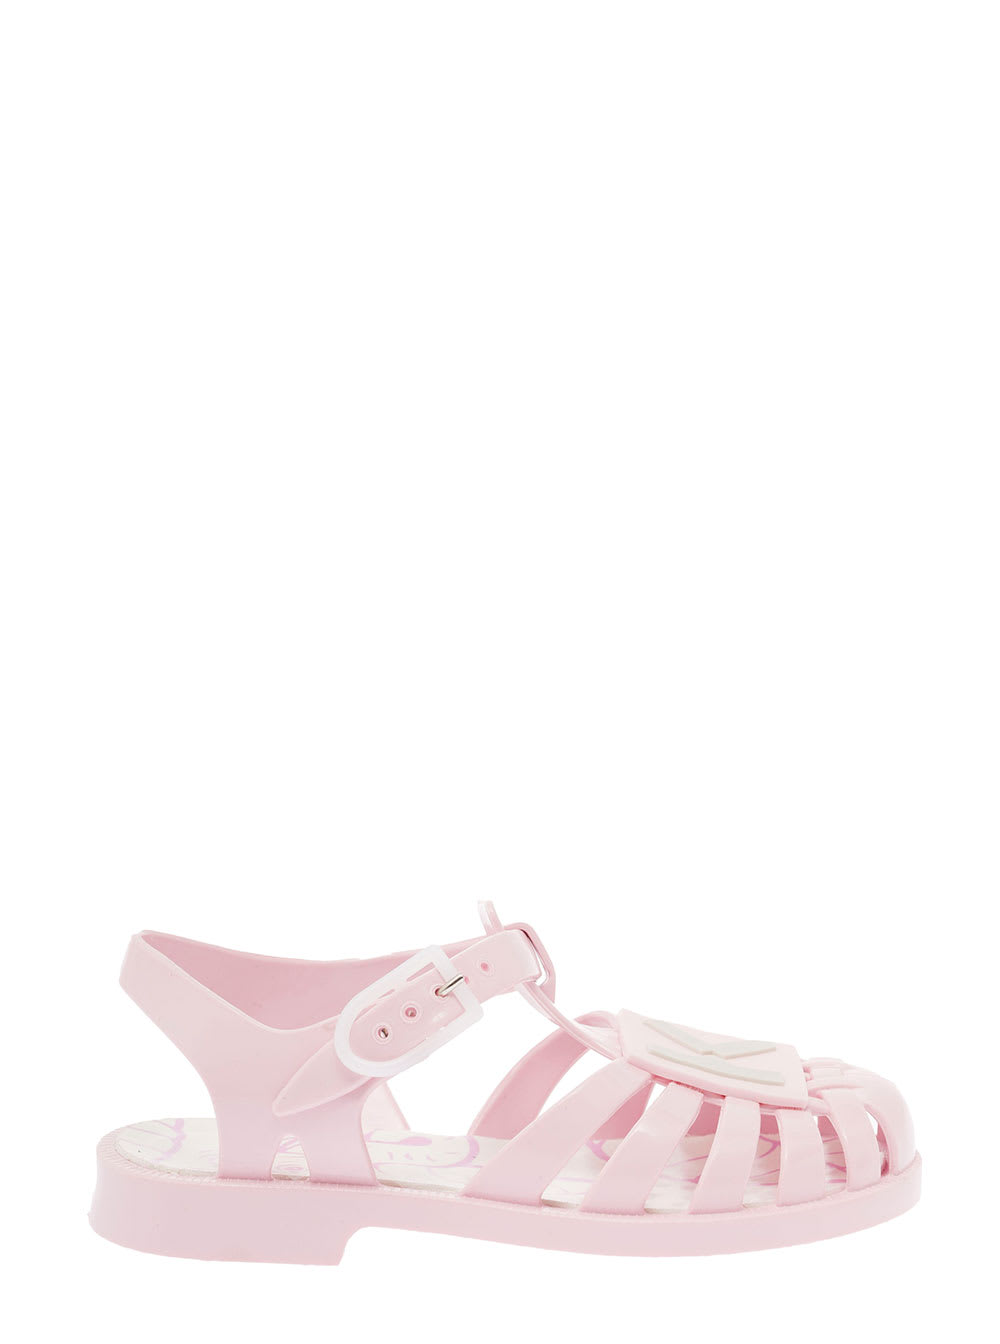 KENZO KENZO GIRLS PINK RUBBER SANDALS WITH LOGO